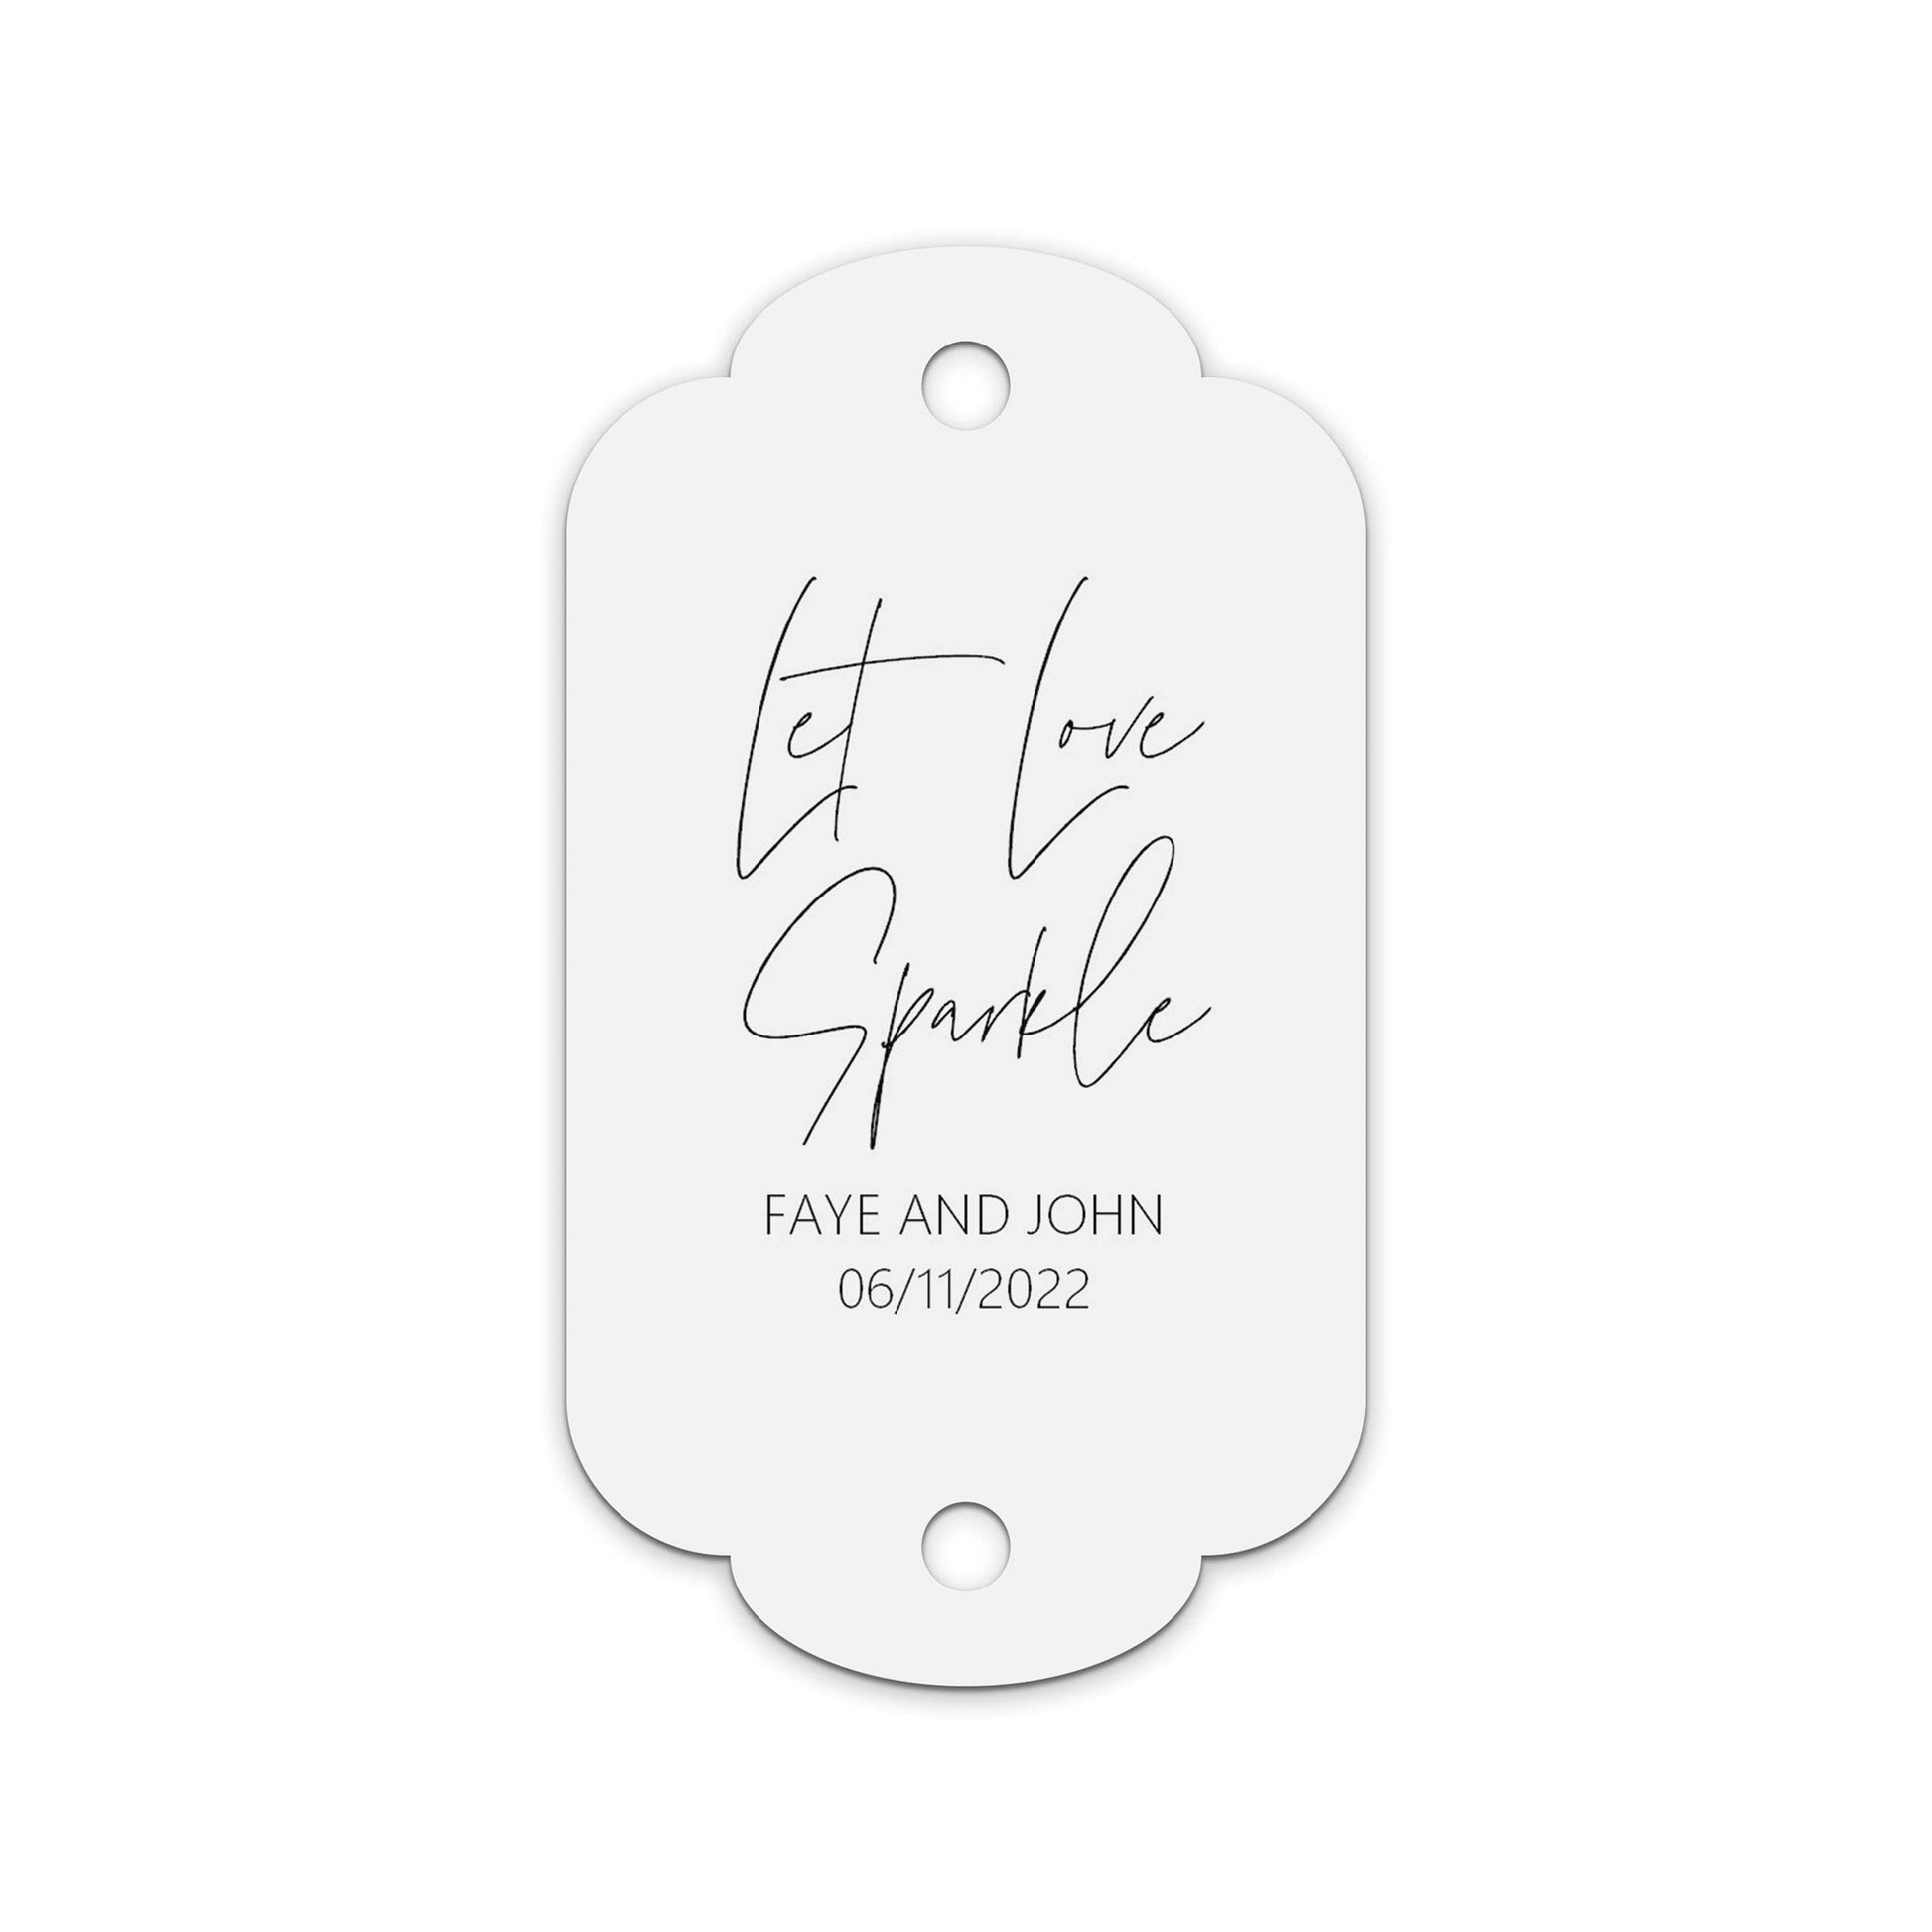  Sparkler Wedding Gift Tags Personalised Black & White, Sold In Packs Of 10 by PMPRINTED 